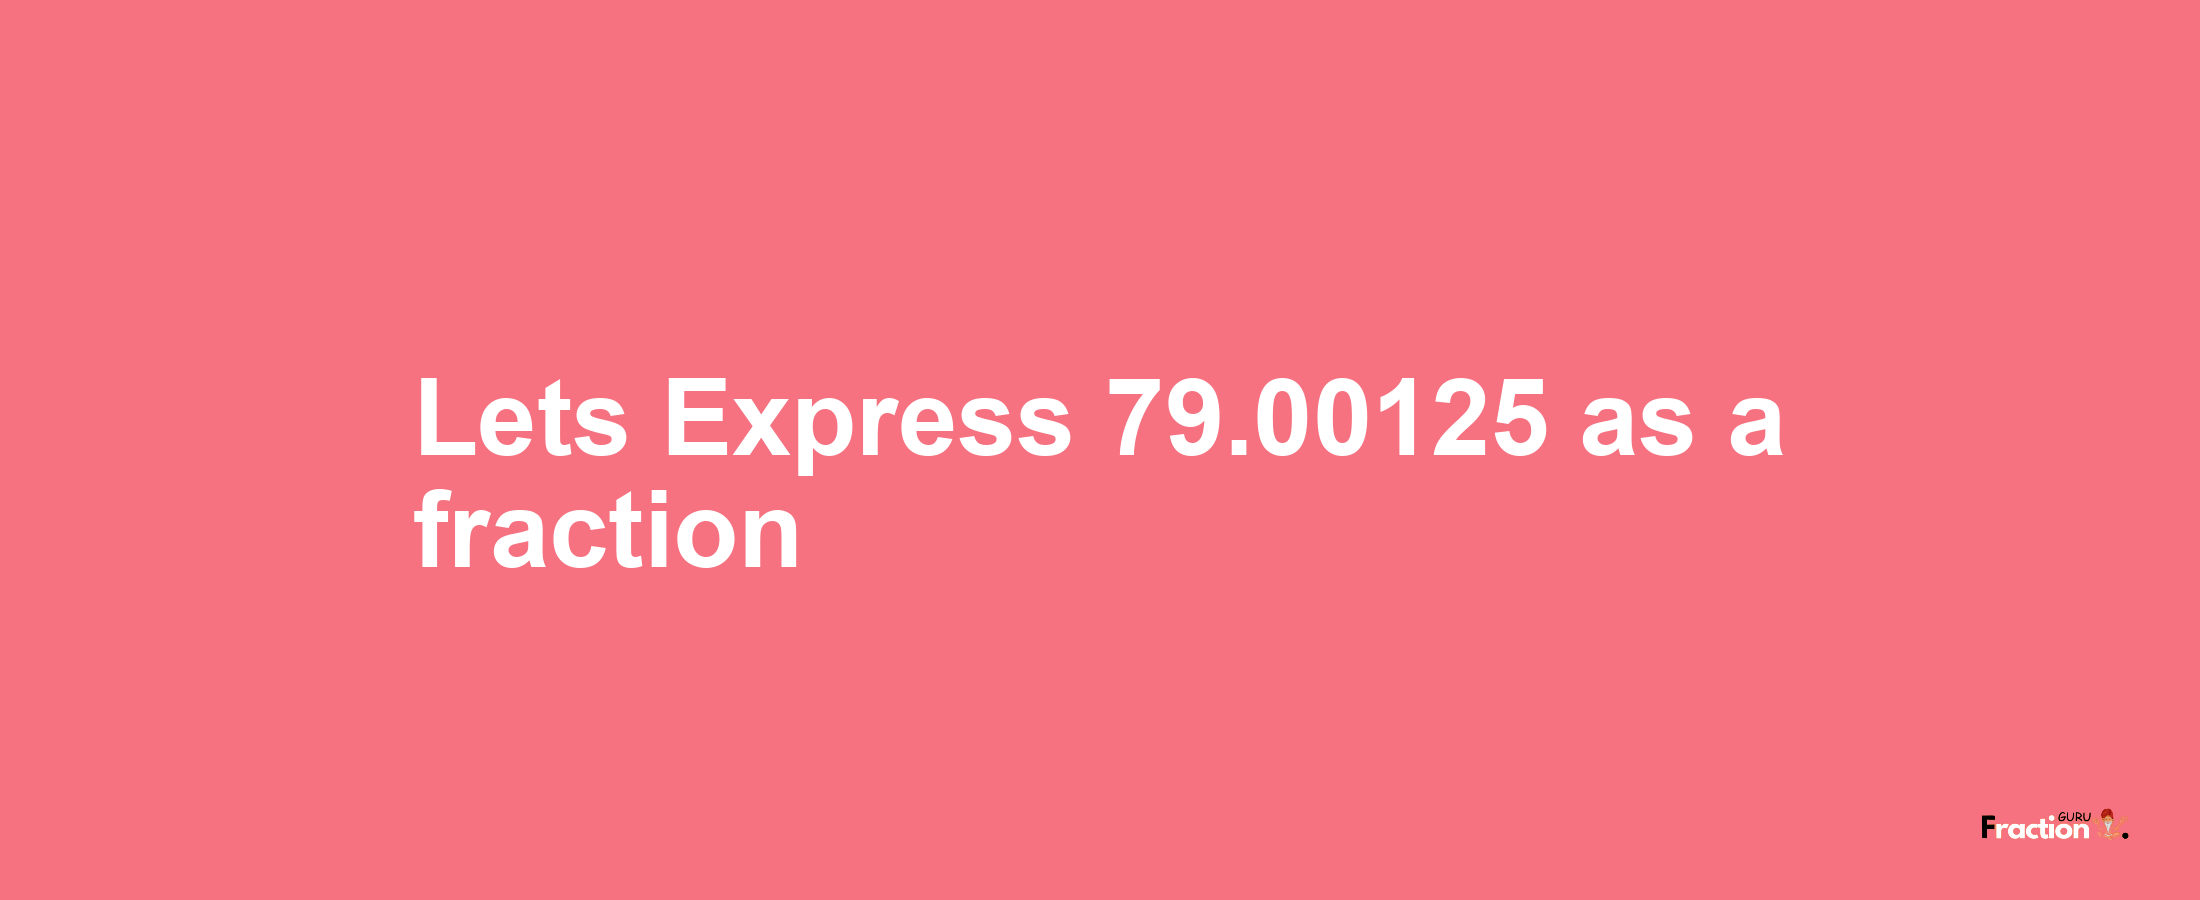 Lets Express 79.00125 as afraction